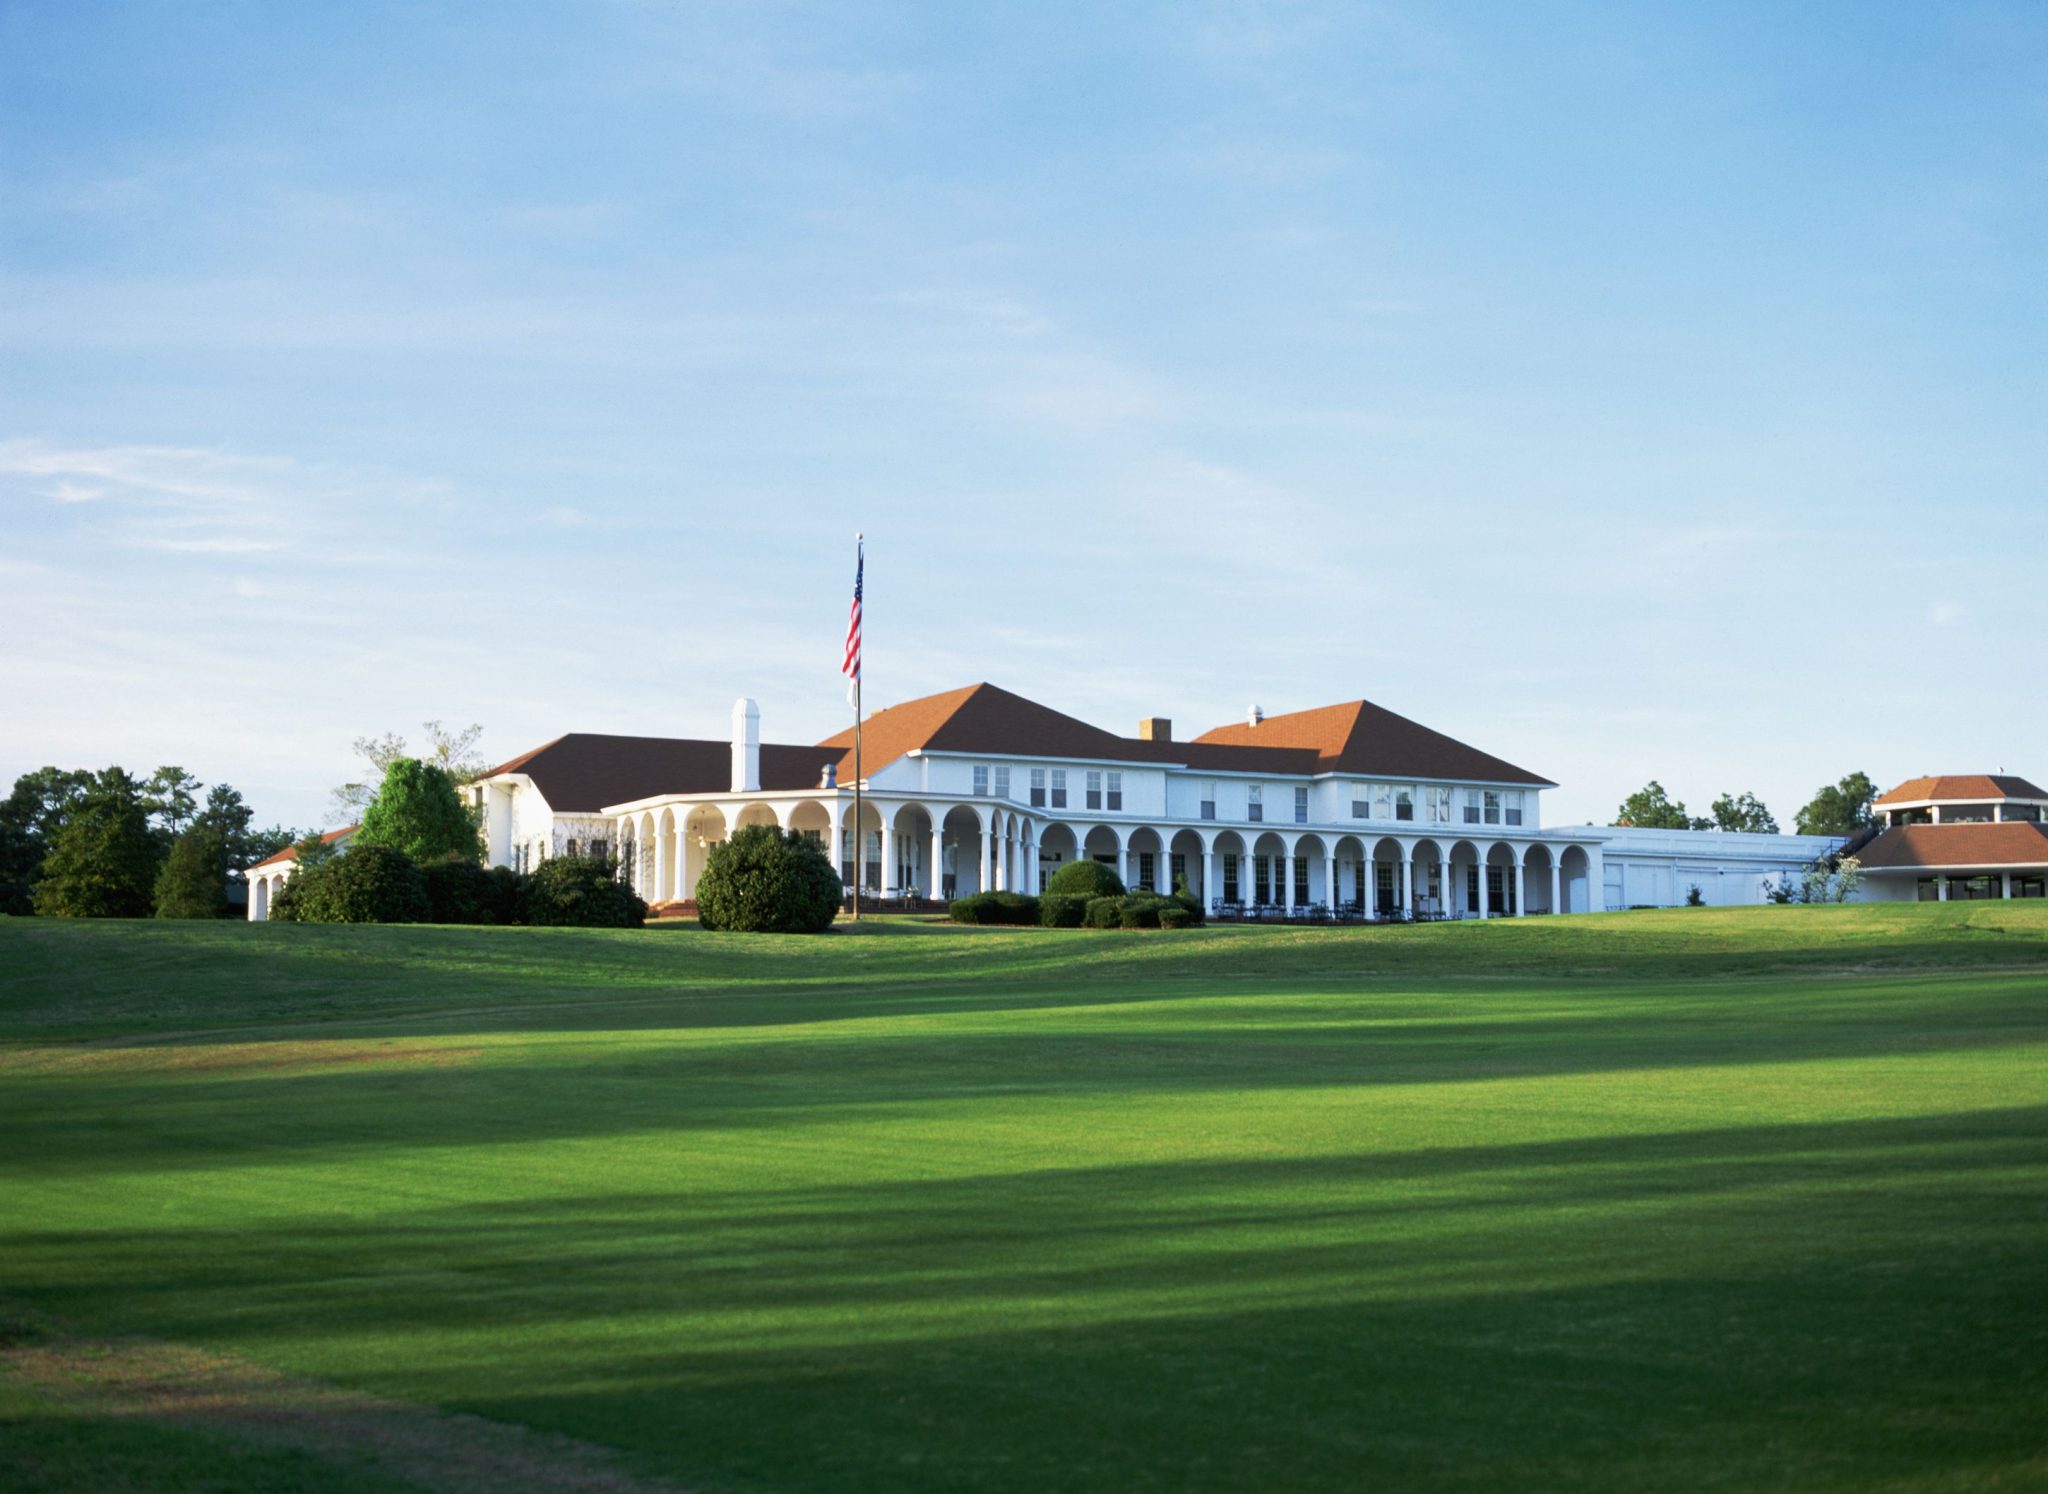 USGA, World Golf Hall of Fame Collaborate to Bring New Visitor